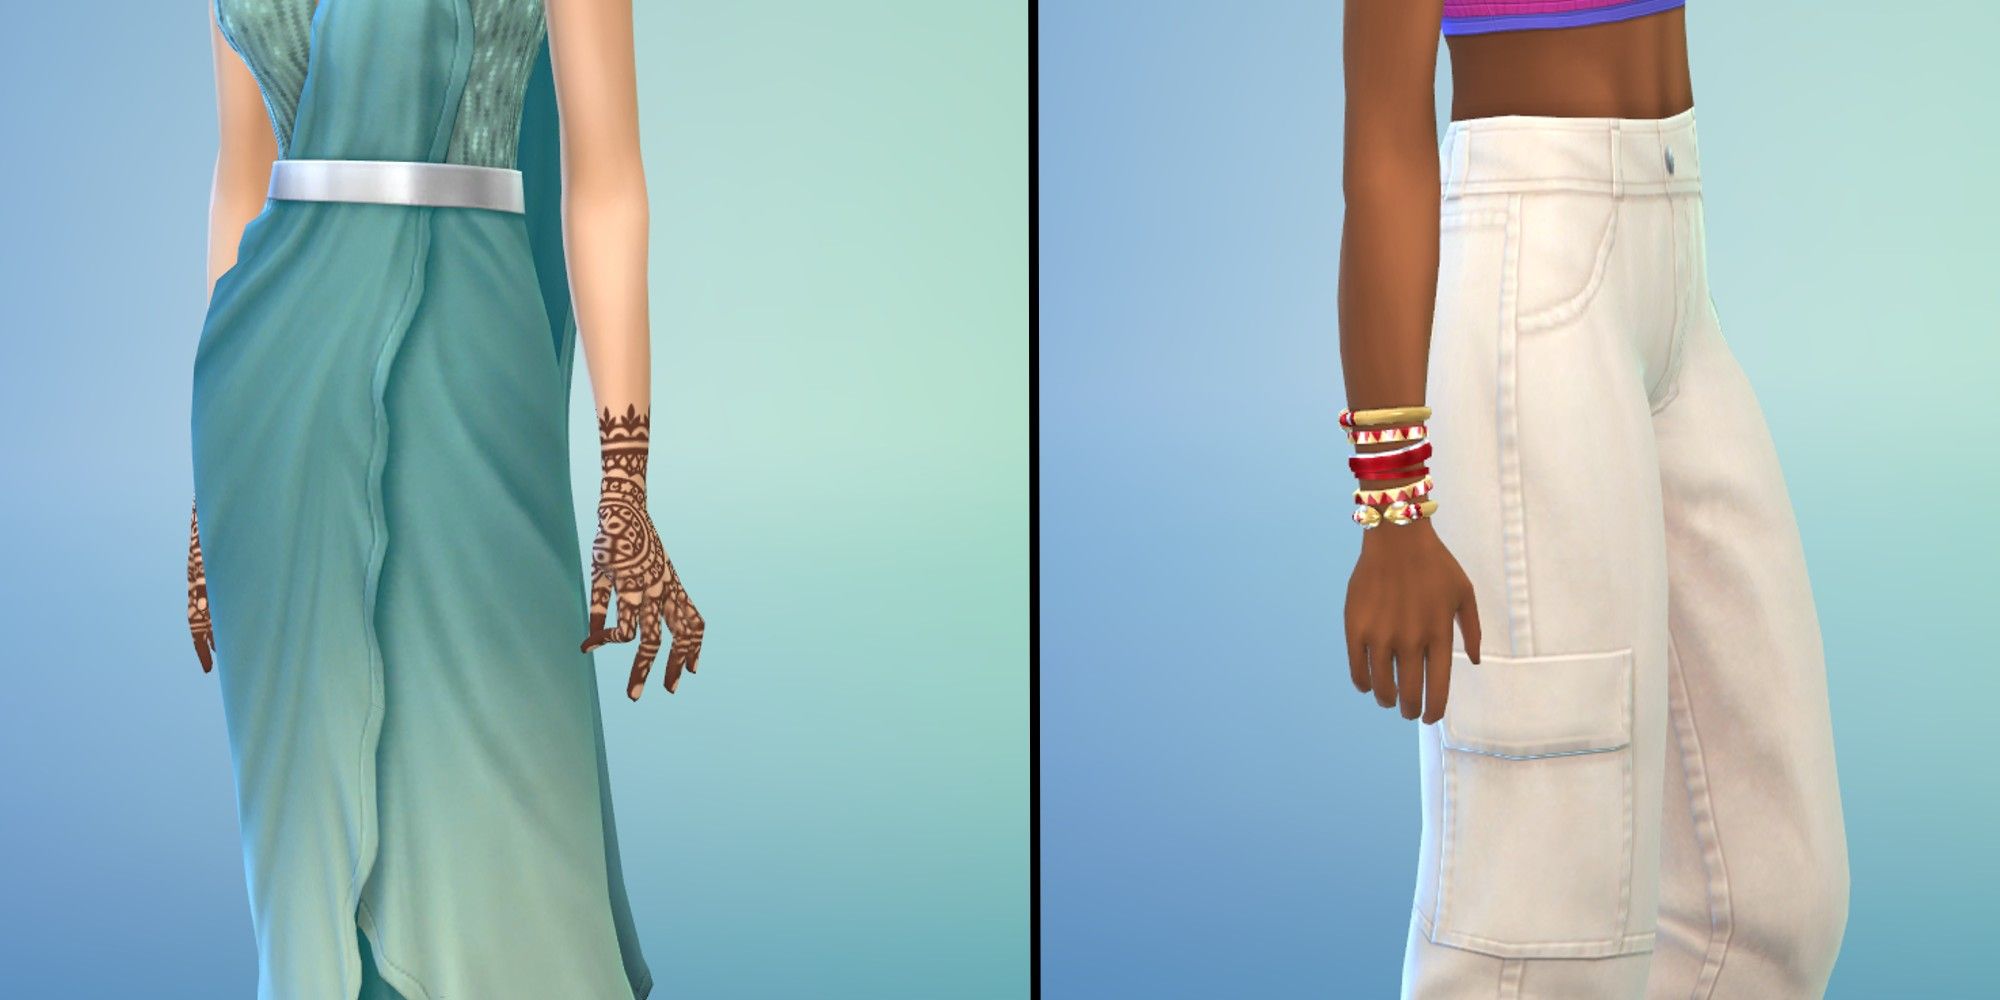 Sims 4: Fashion Steet Kit, Hand Tatto & Bracelet with default swatches, in the CAS Screen